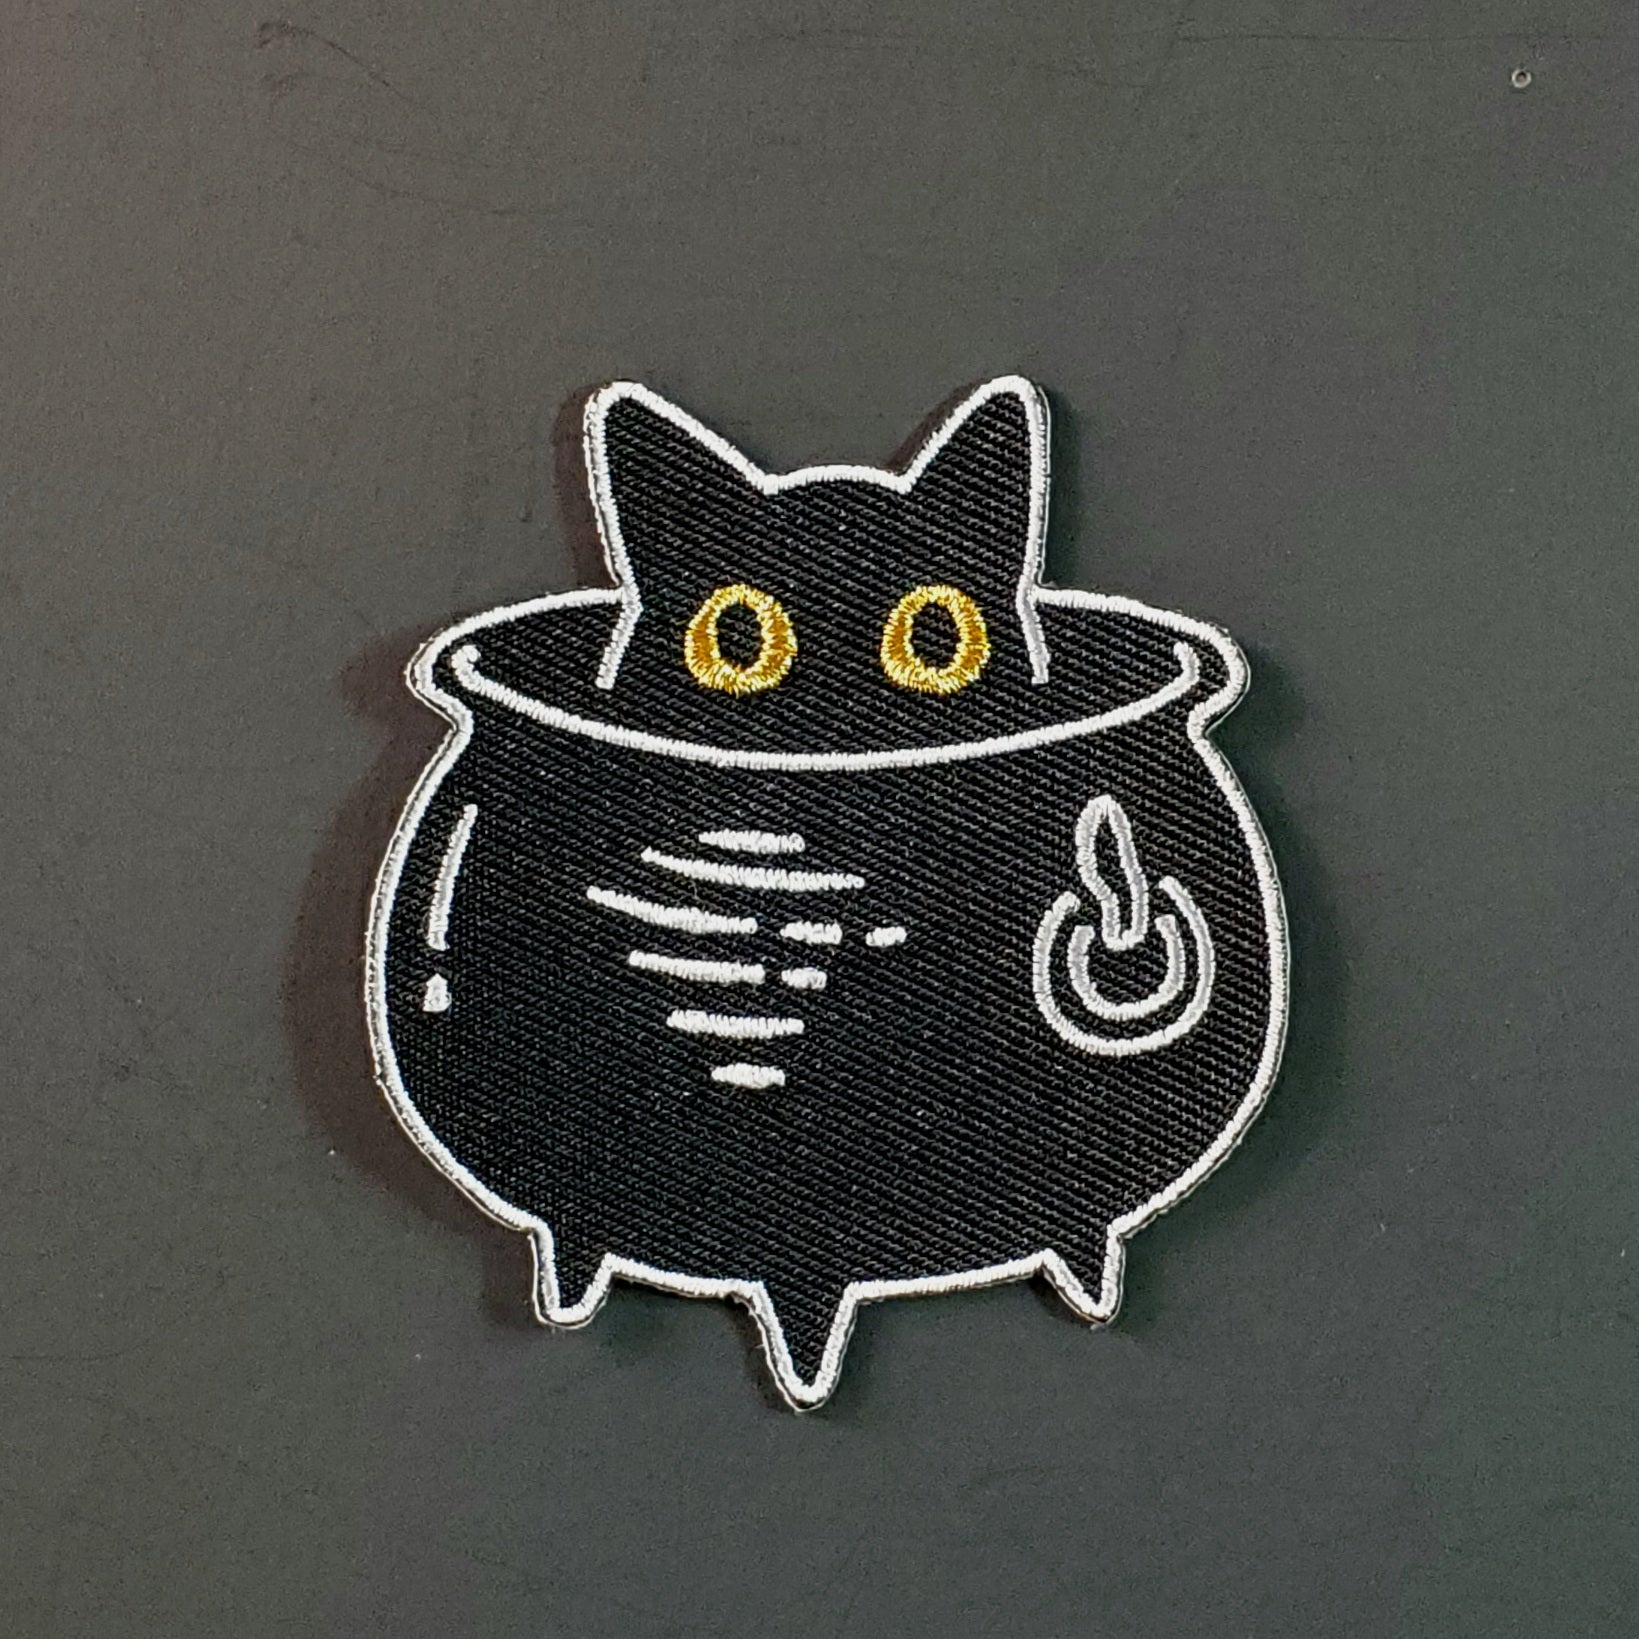 Black twill embroidered patch of a black cat with large metallic gold eyes sticking its head out of a cauldron